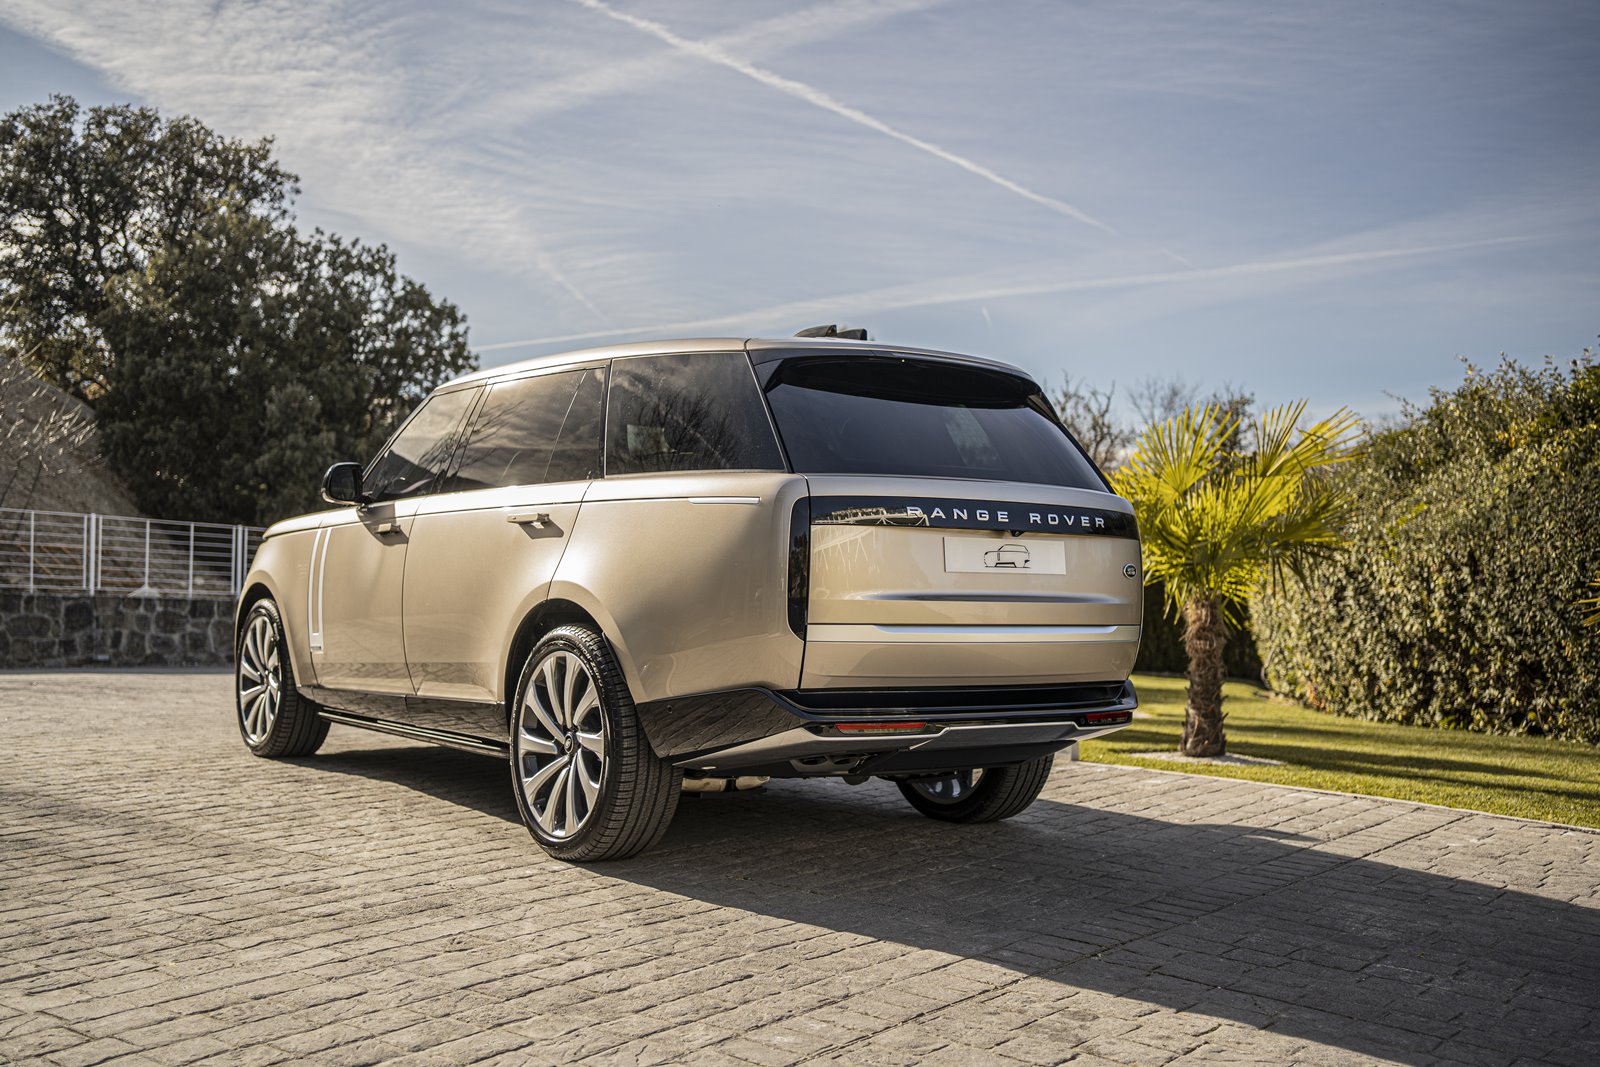 This is how the new Range Rover 2022 looks live. Do you like it?